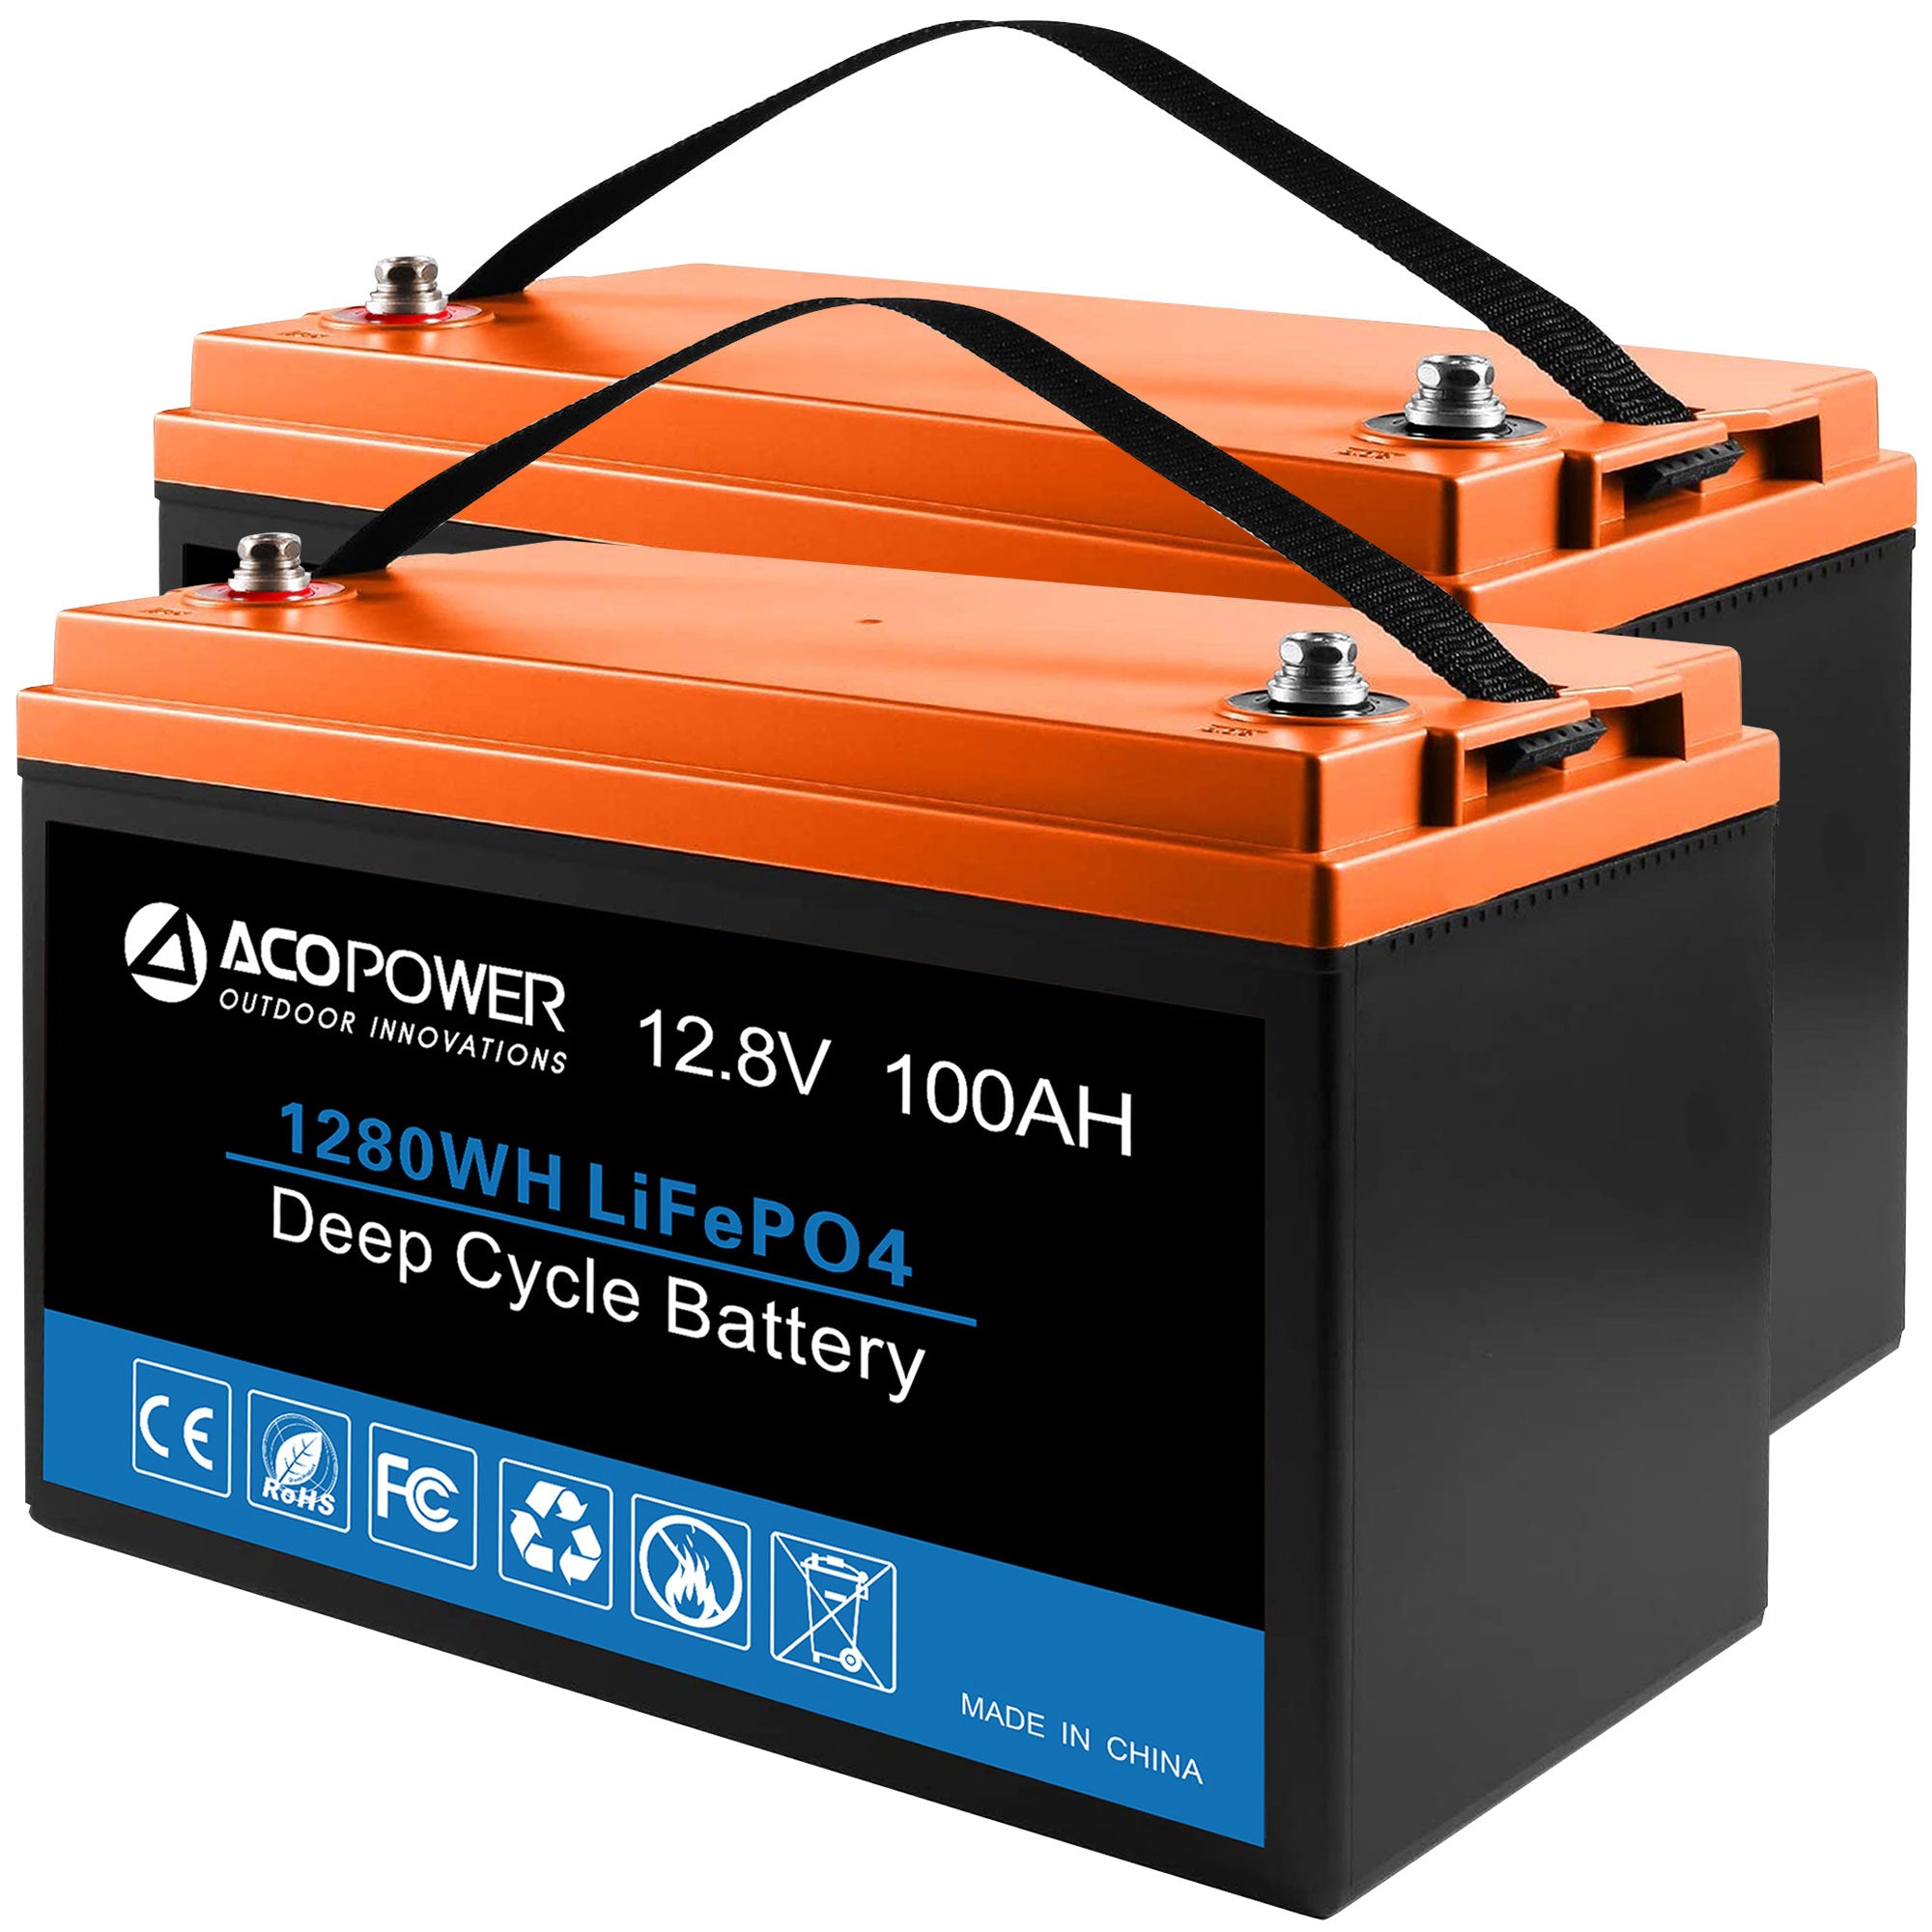 ACOPOWER Lithium Battery Mono Solar Power Complete System with Battery